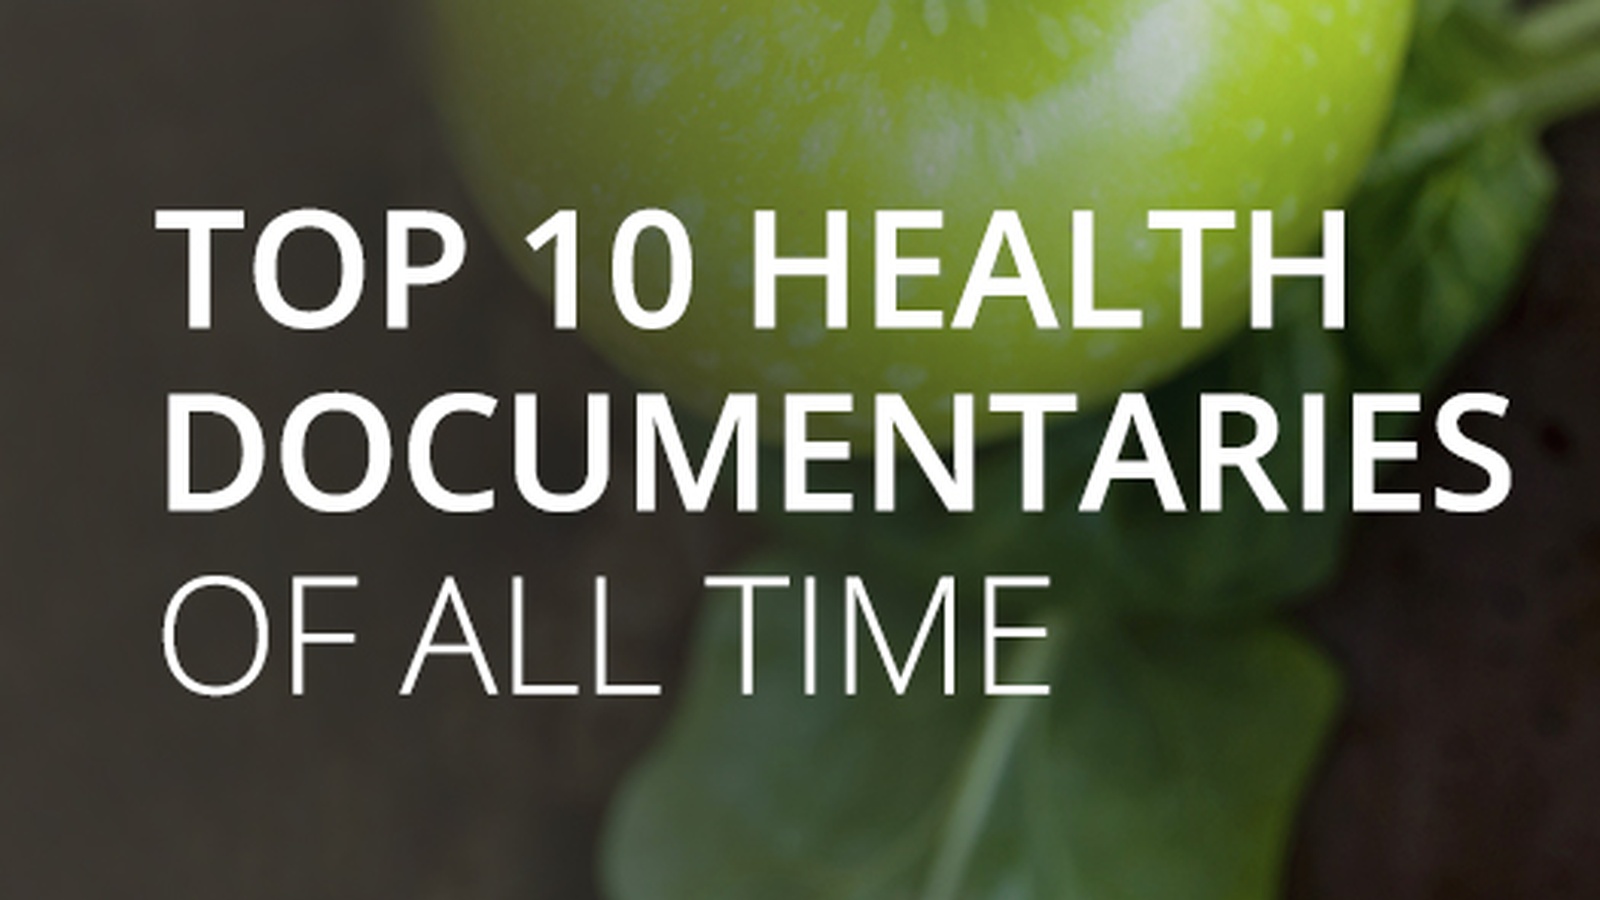 Top 10 Health Documentaries Of All Time